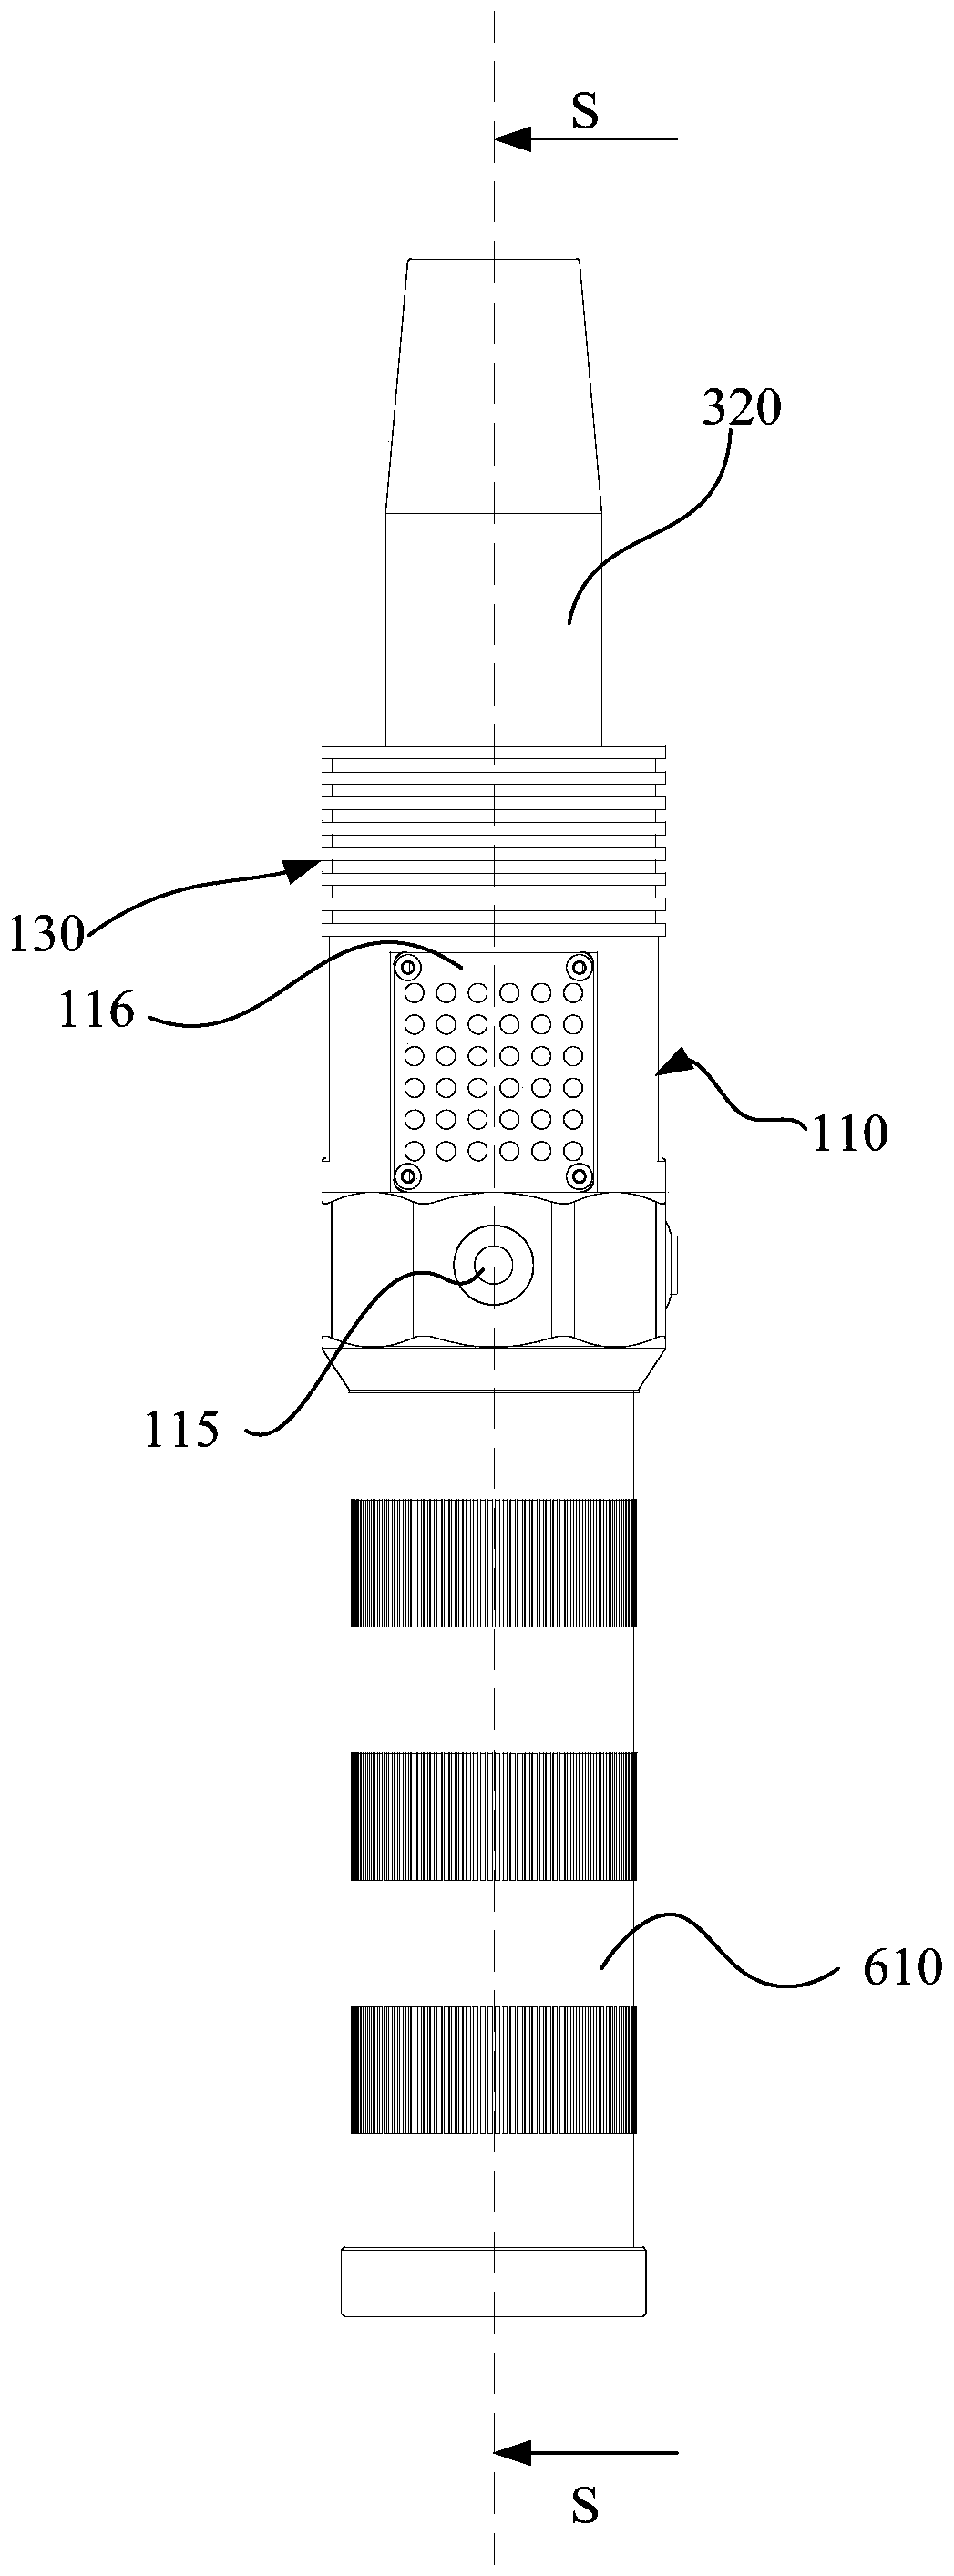 Non-destructive instantaneous display device for anti-generation